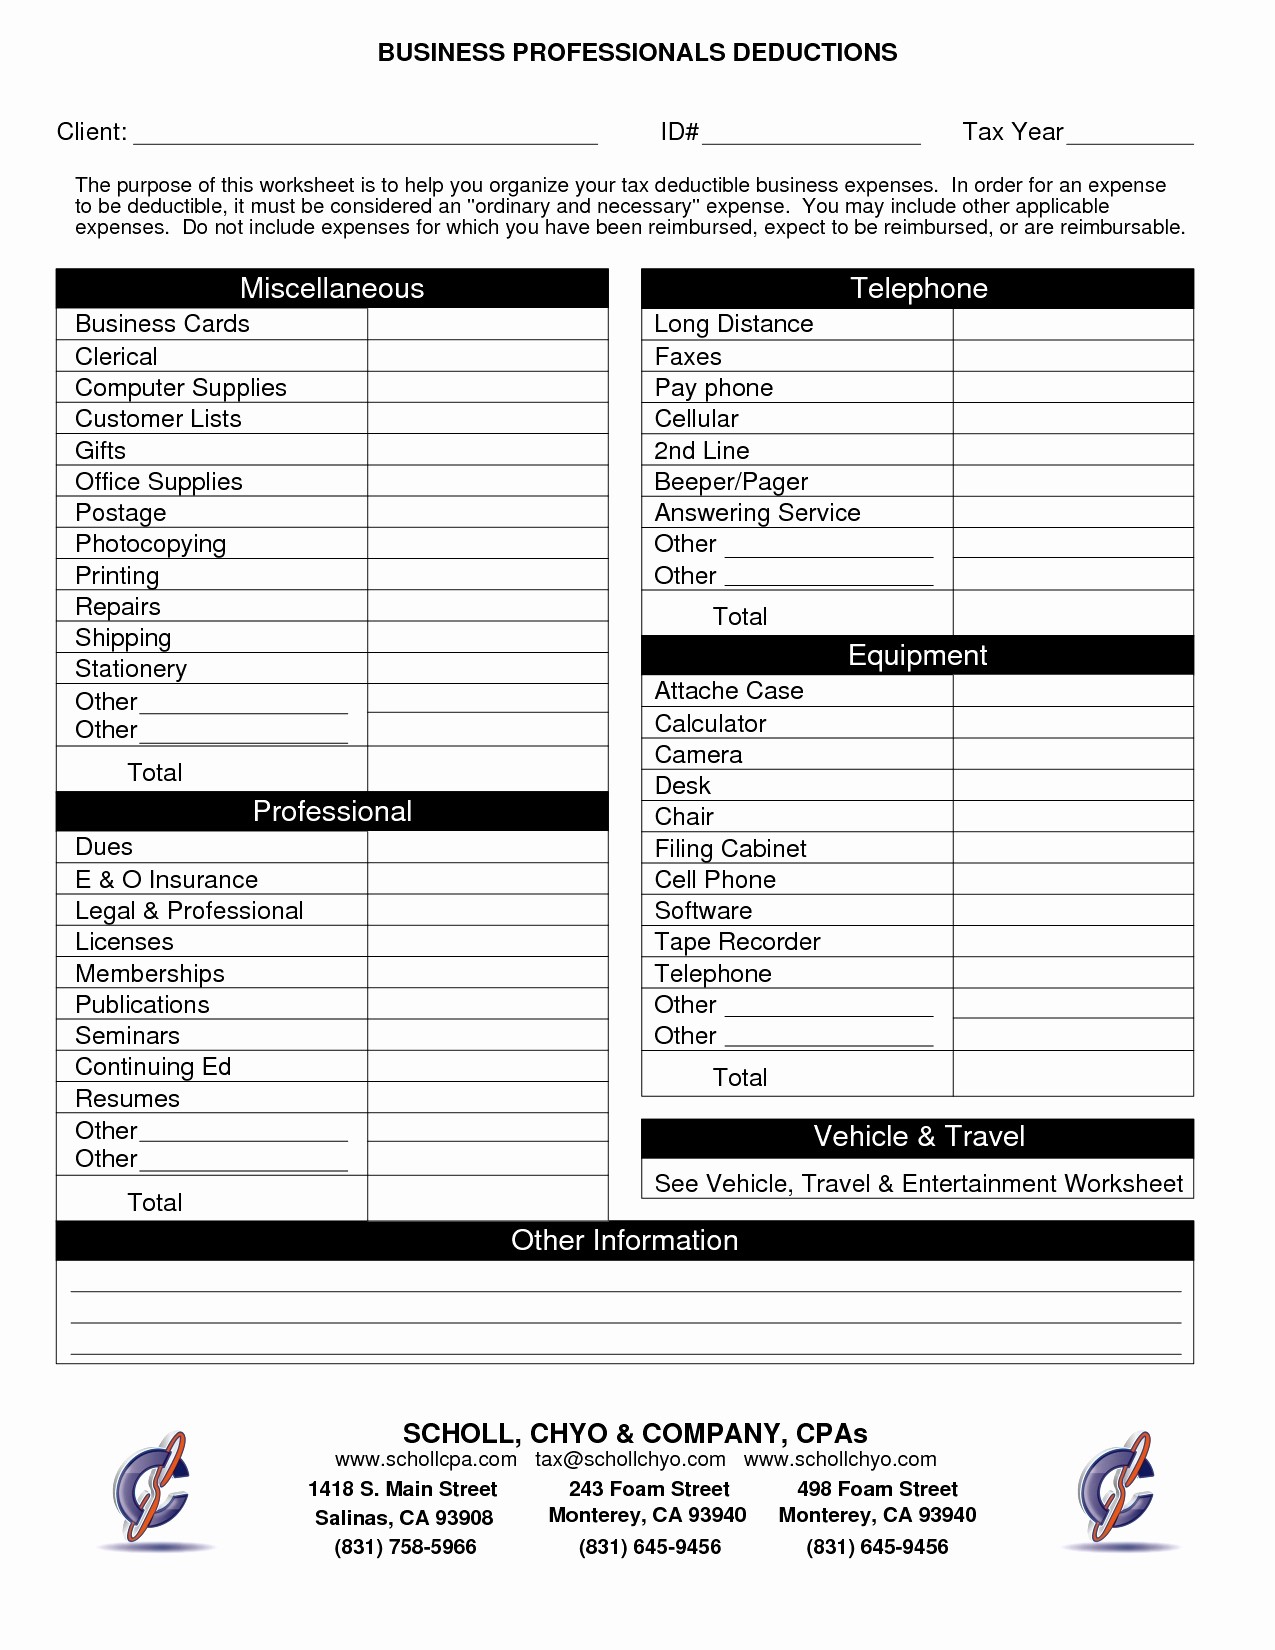 Itemized Deductions Worksheet For Small Business Awesome Document